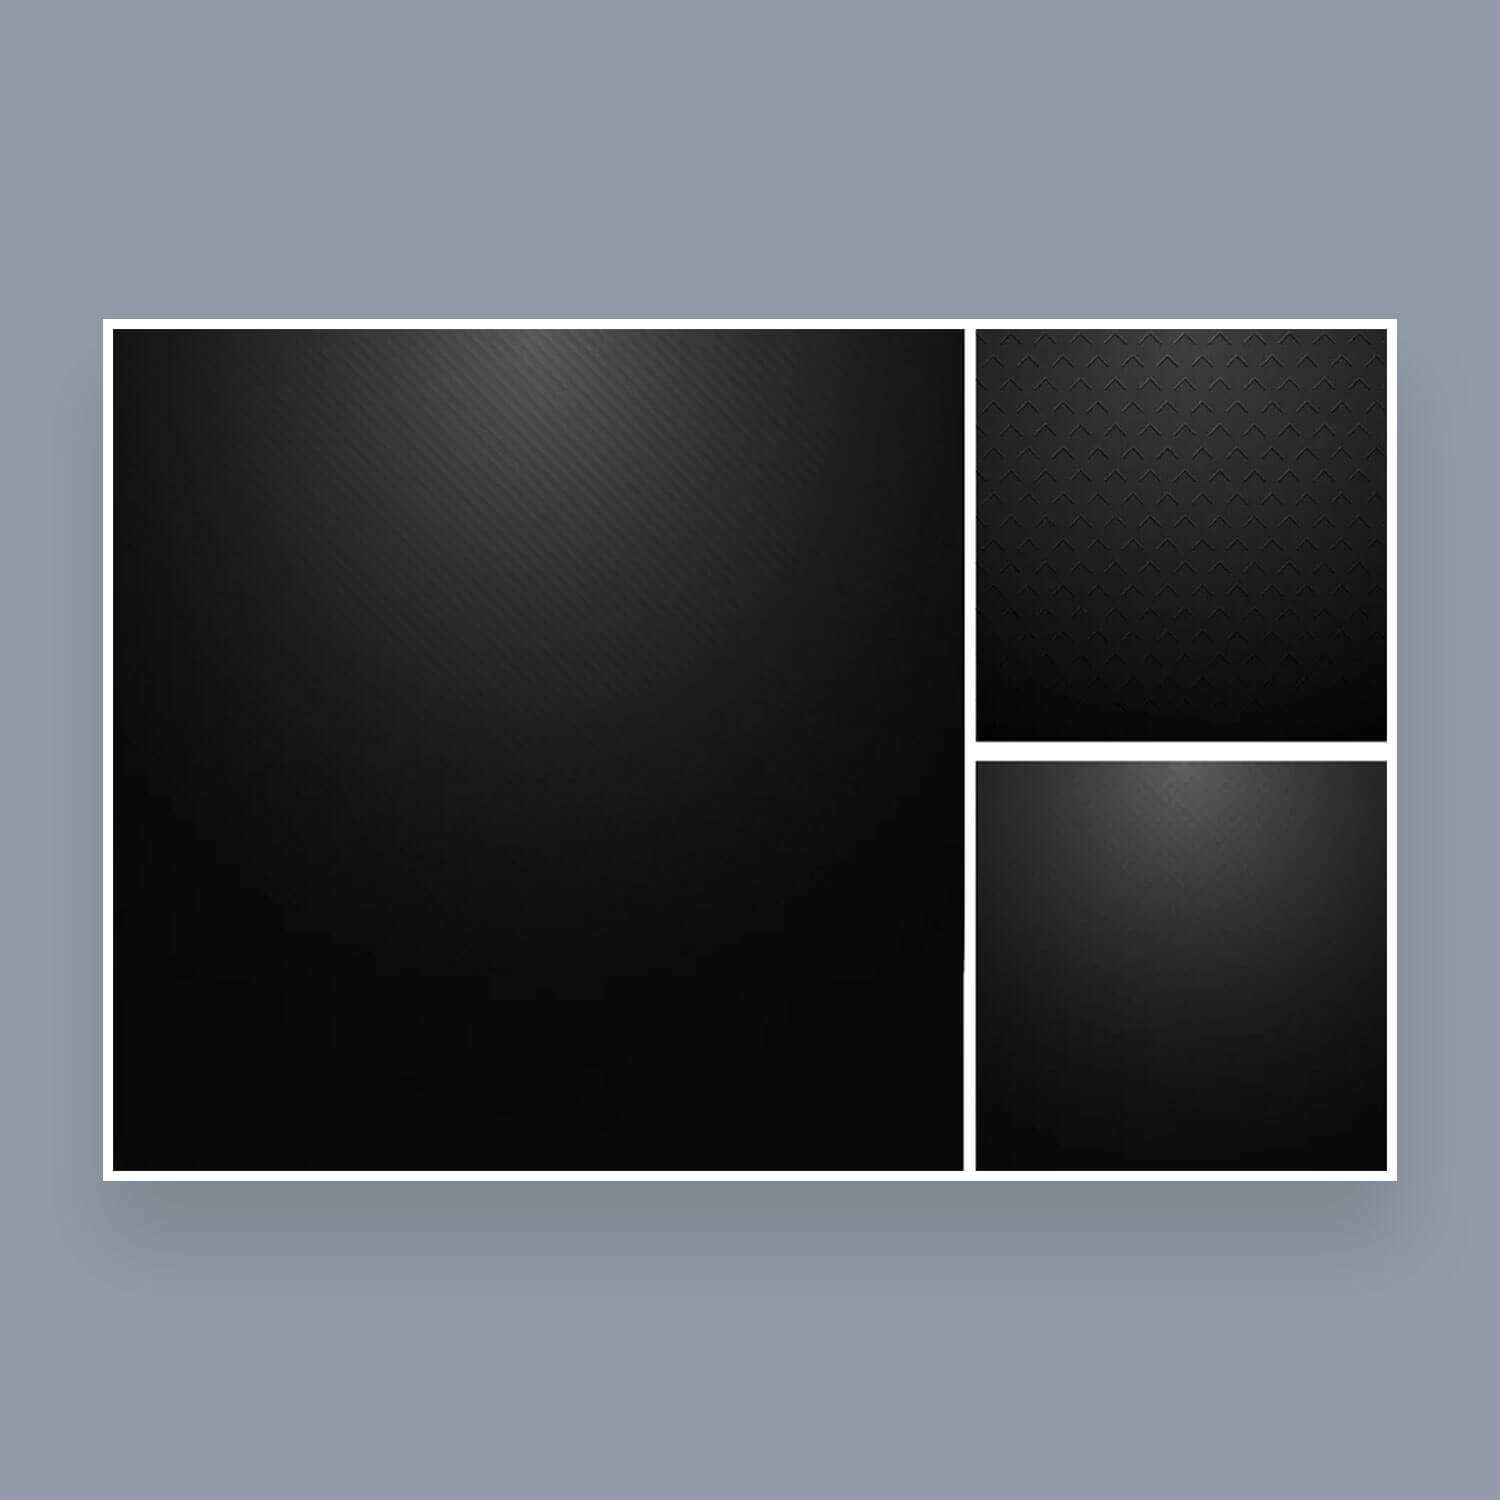 Three variants of carbon surfaces with a dark texture.